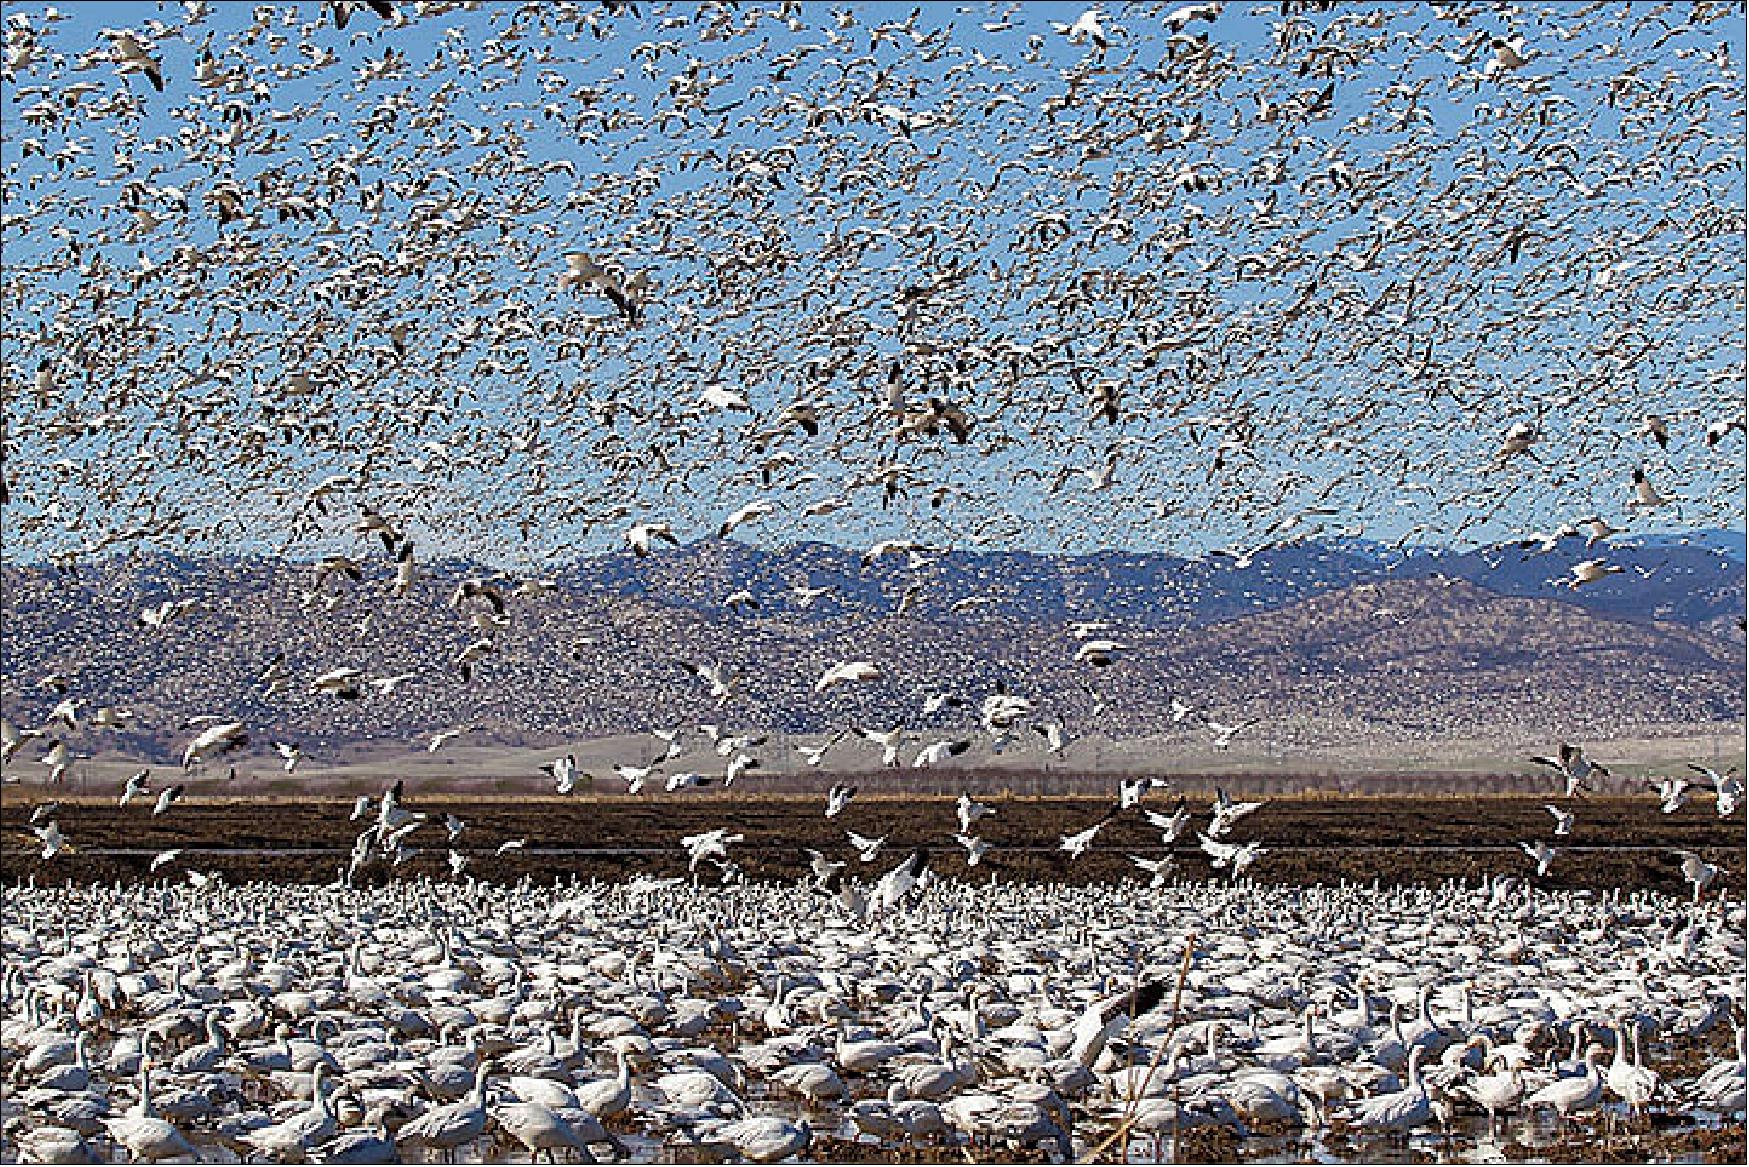 Figure 91: This photo shows a massive flock of snow geese congregating in a rice field in the Sacramento Valley on February 22, 2014, an unusually dry year (image credit: NASA Earth Observatory, Photographs by Leslie Morris and Brian Baer for the California Rice Commission (used with permission). Story by Adam Voiland)